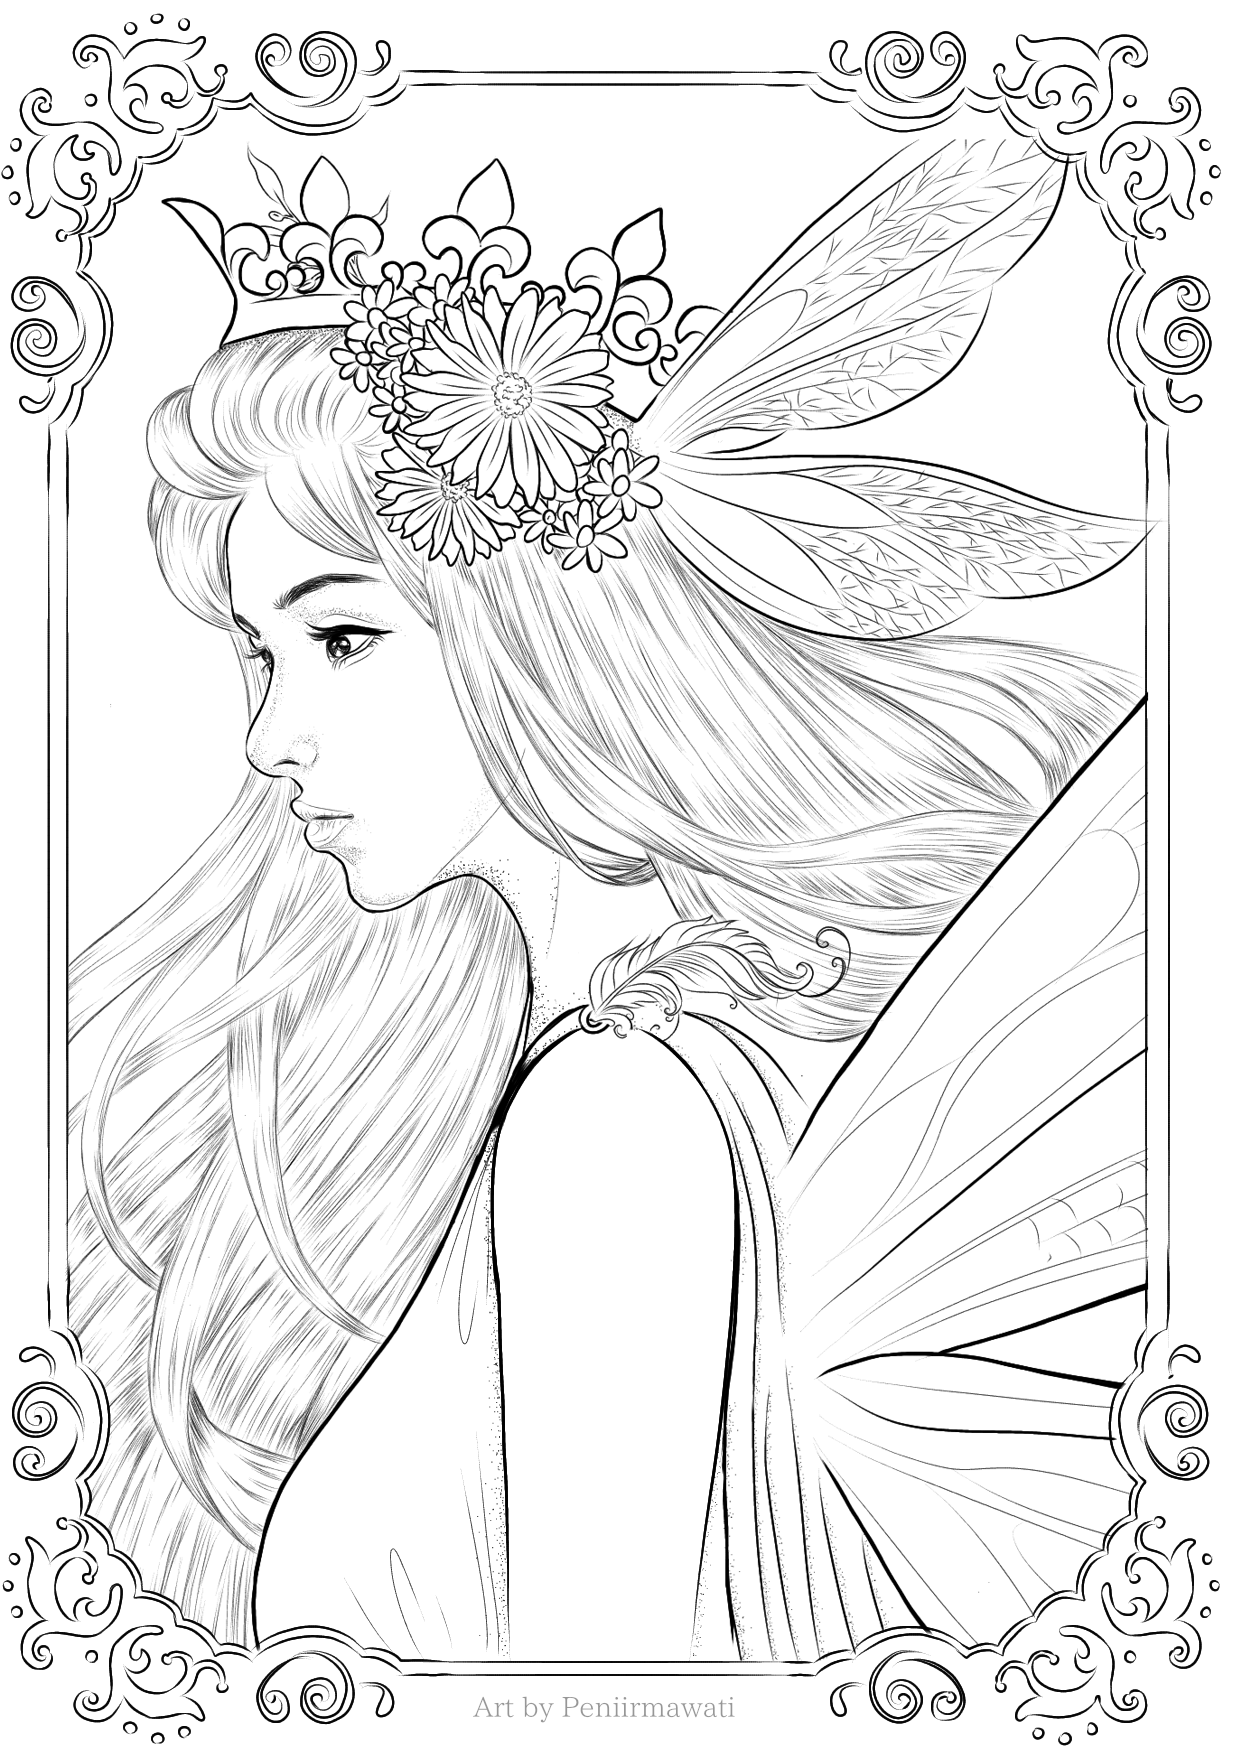 Fairybypeni coloring page freebie lineart by peniirarts on